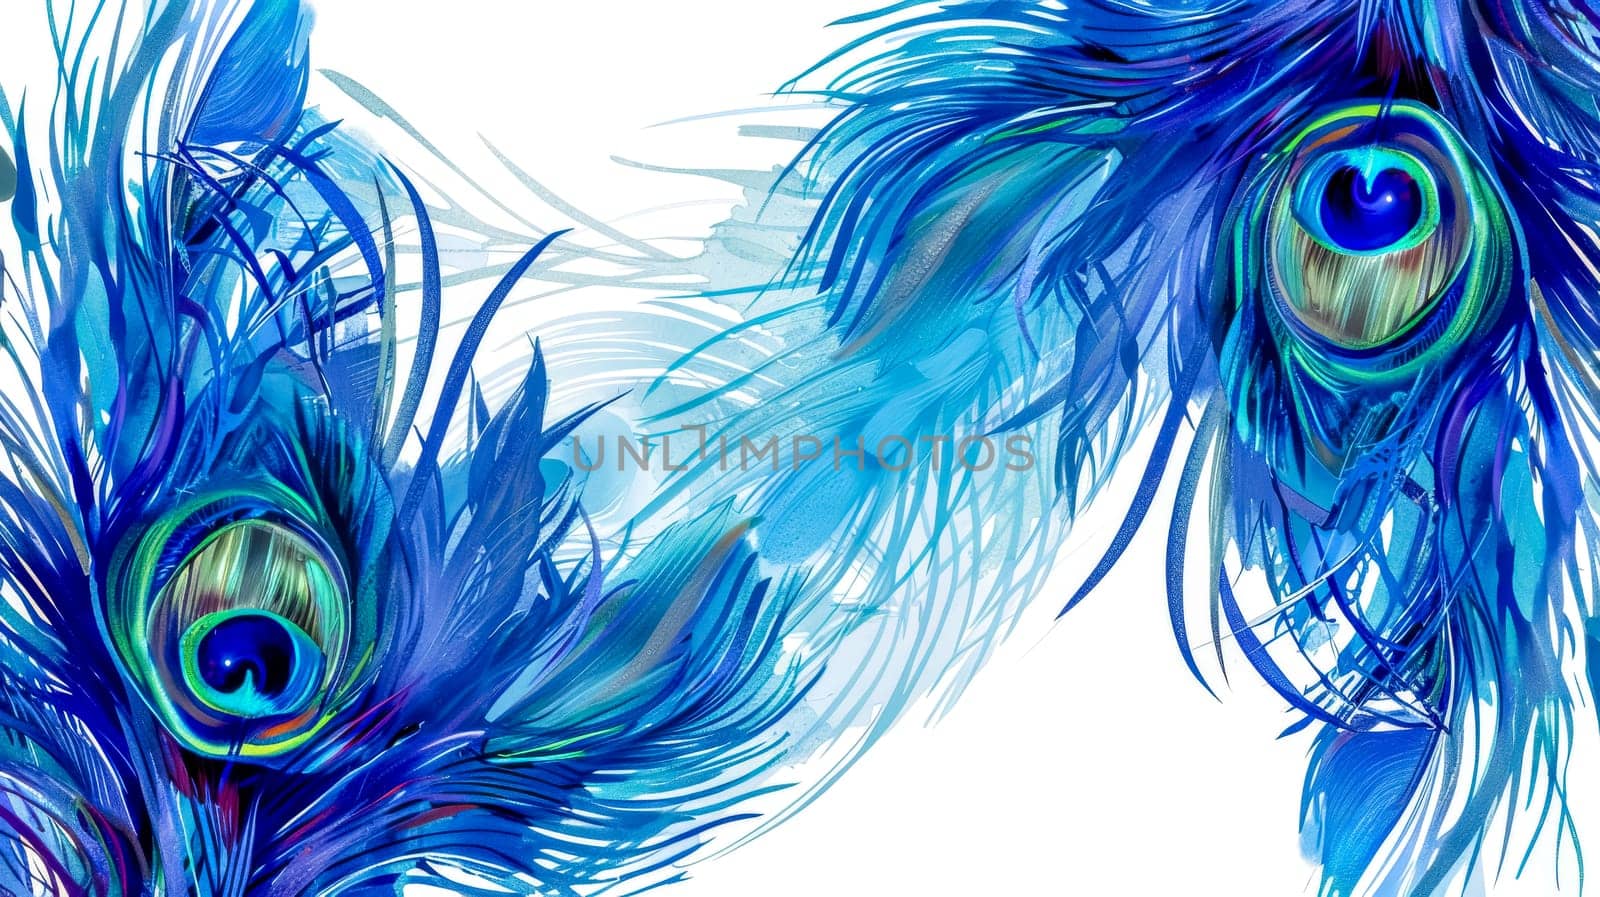 Vibrant blue peacock feather abstract design by Edophoto